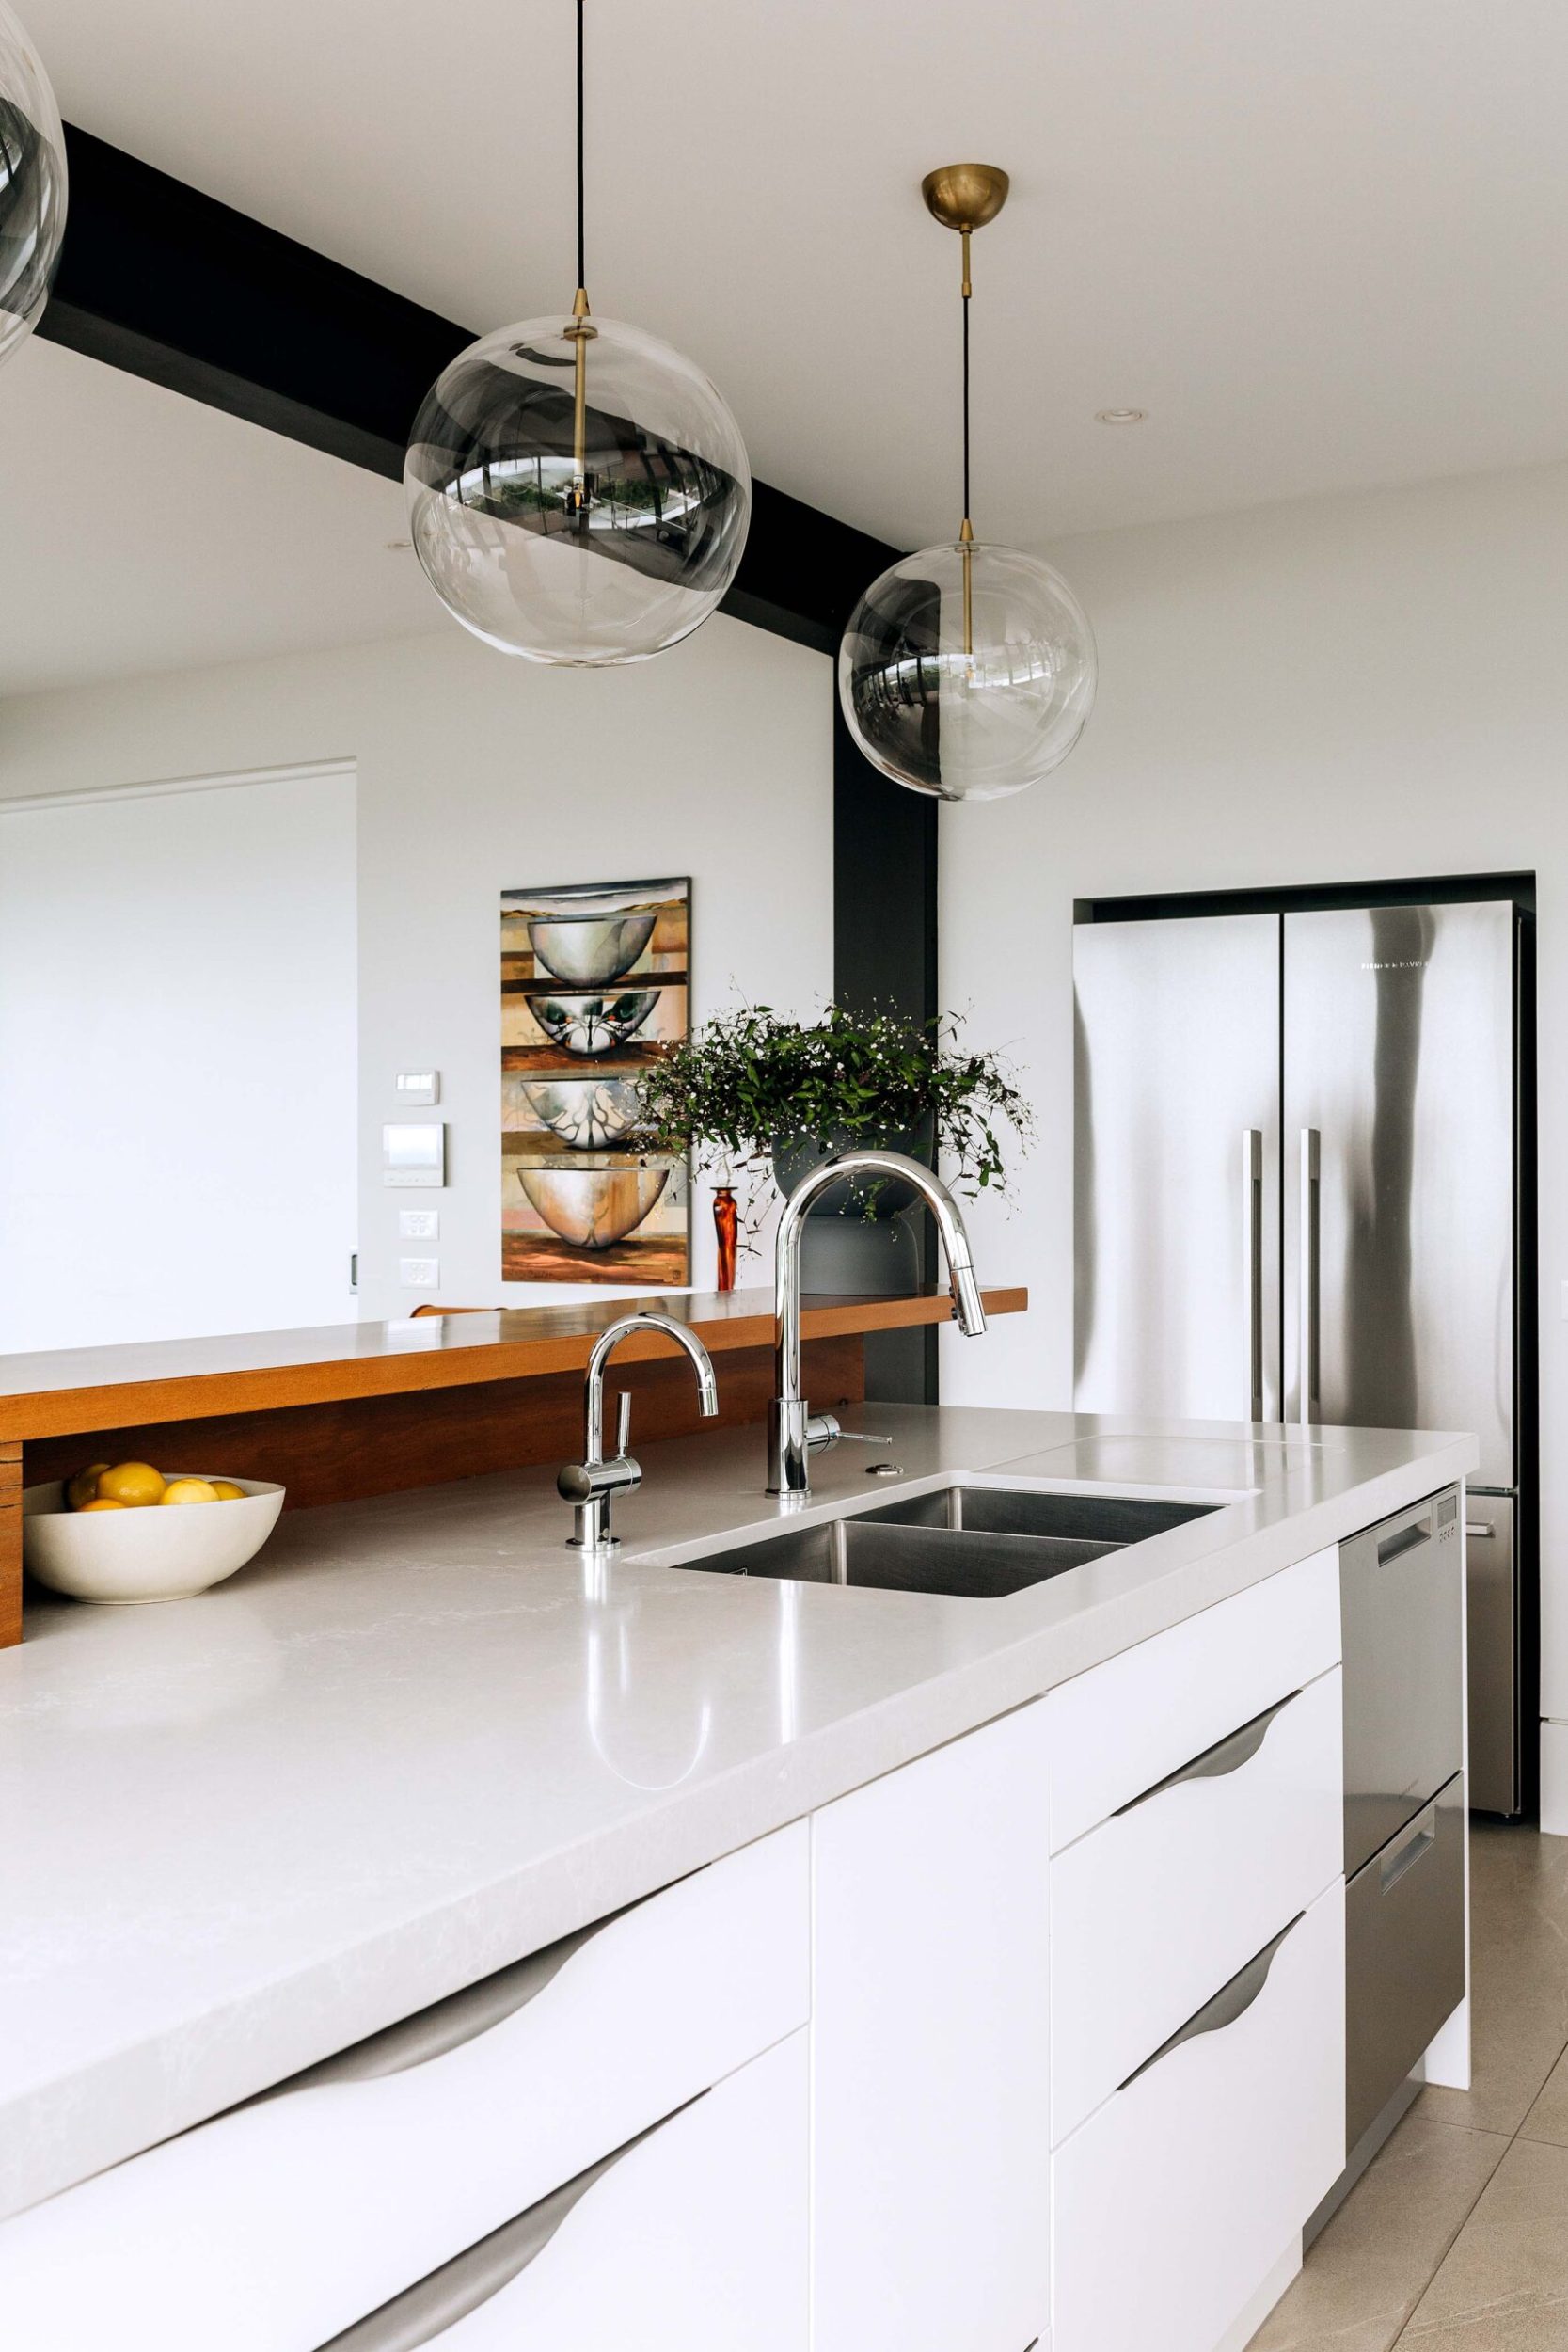 Kitchen with silver finishings, a white marble benchtop and hanging glass pendant lights